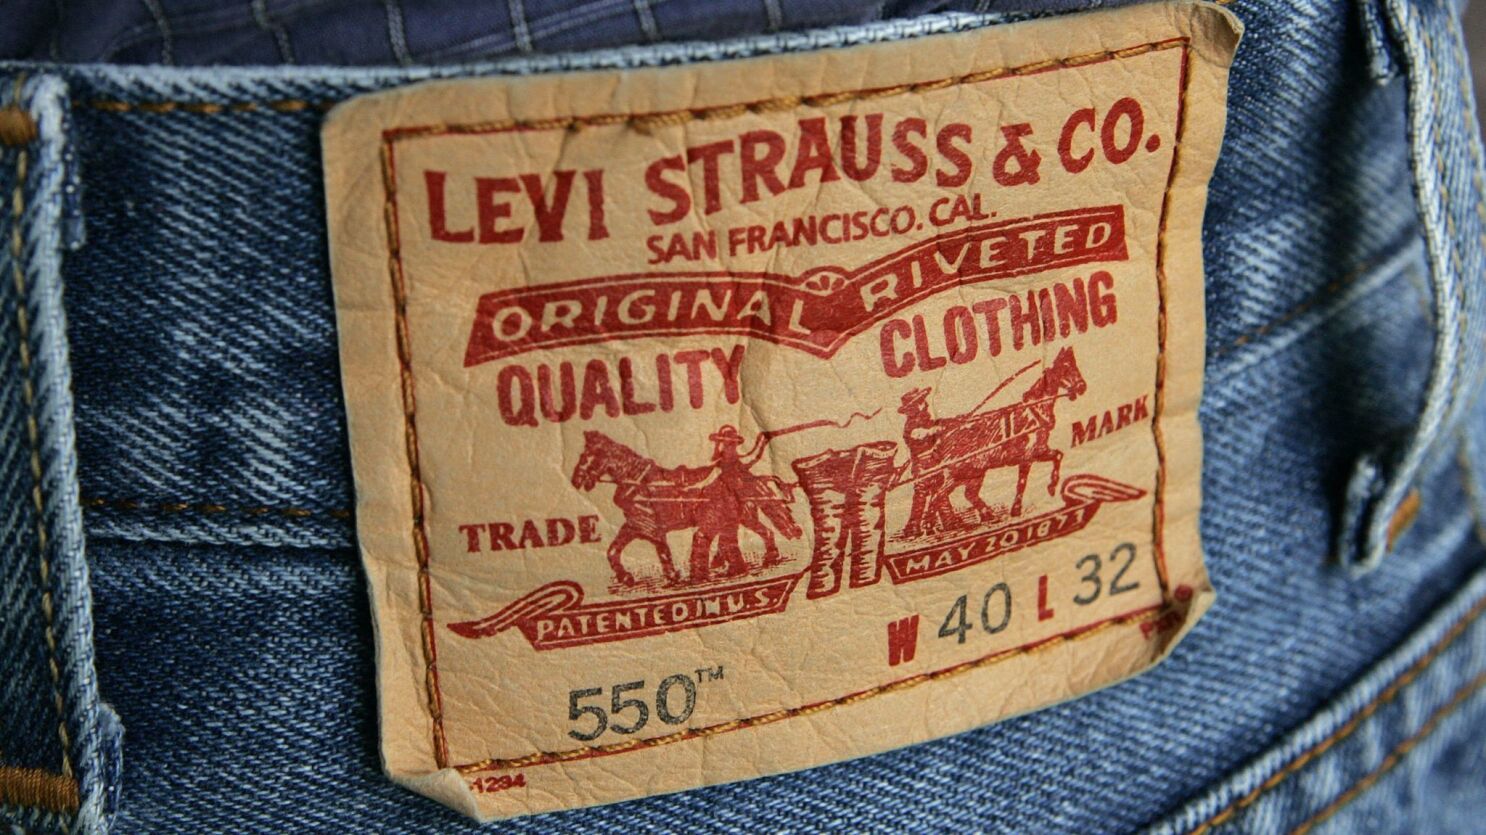 You don't need a gun' to try on jeans: Levi's CEO asks customers not to  carry firearms in stores - Los Angeles Times